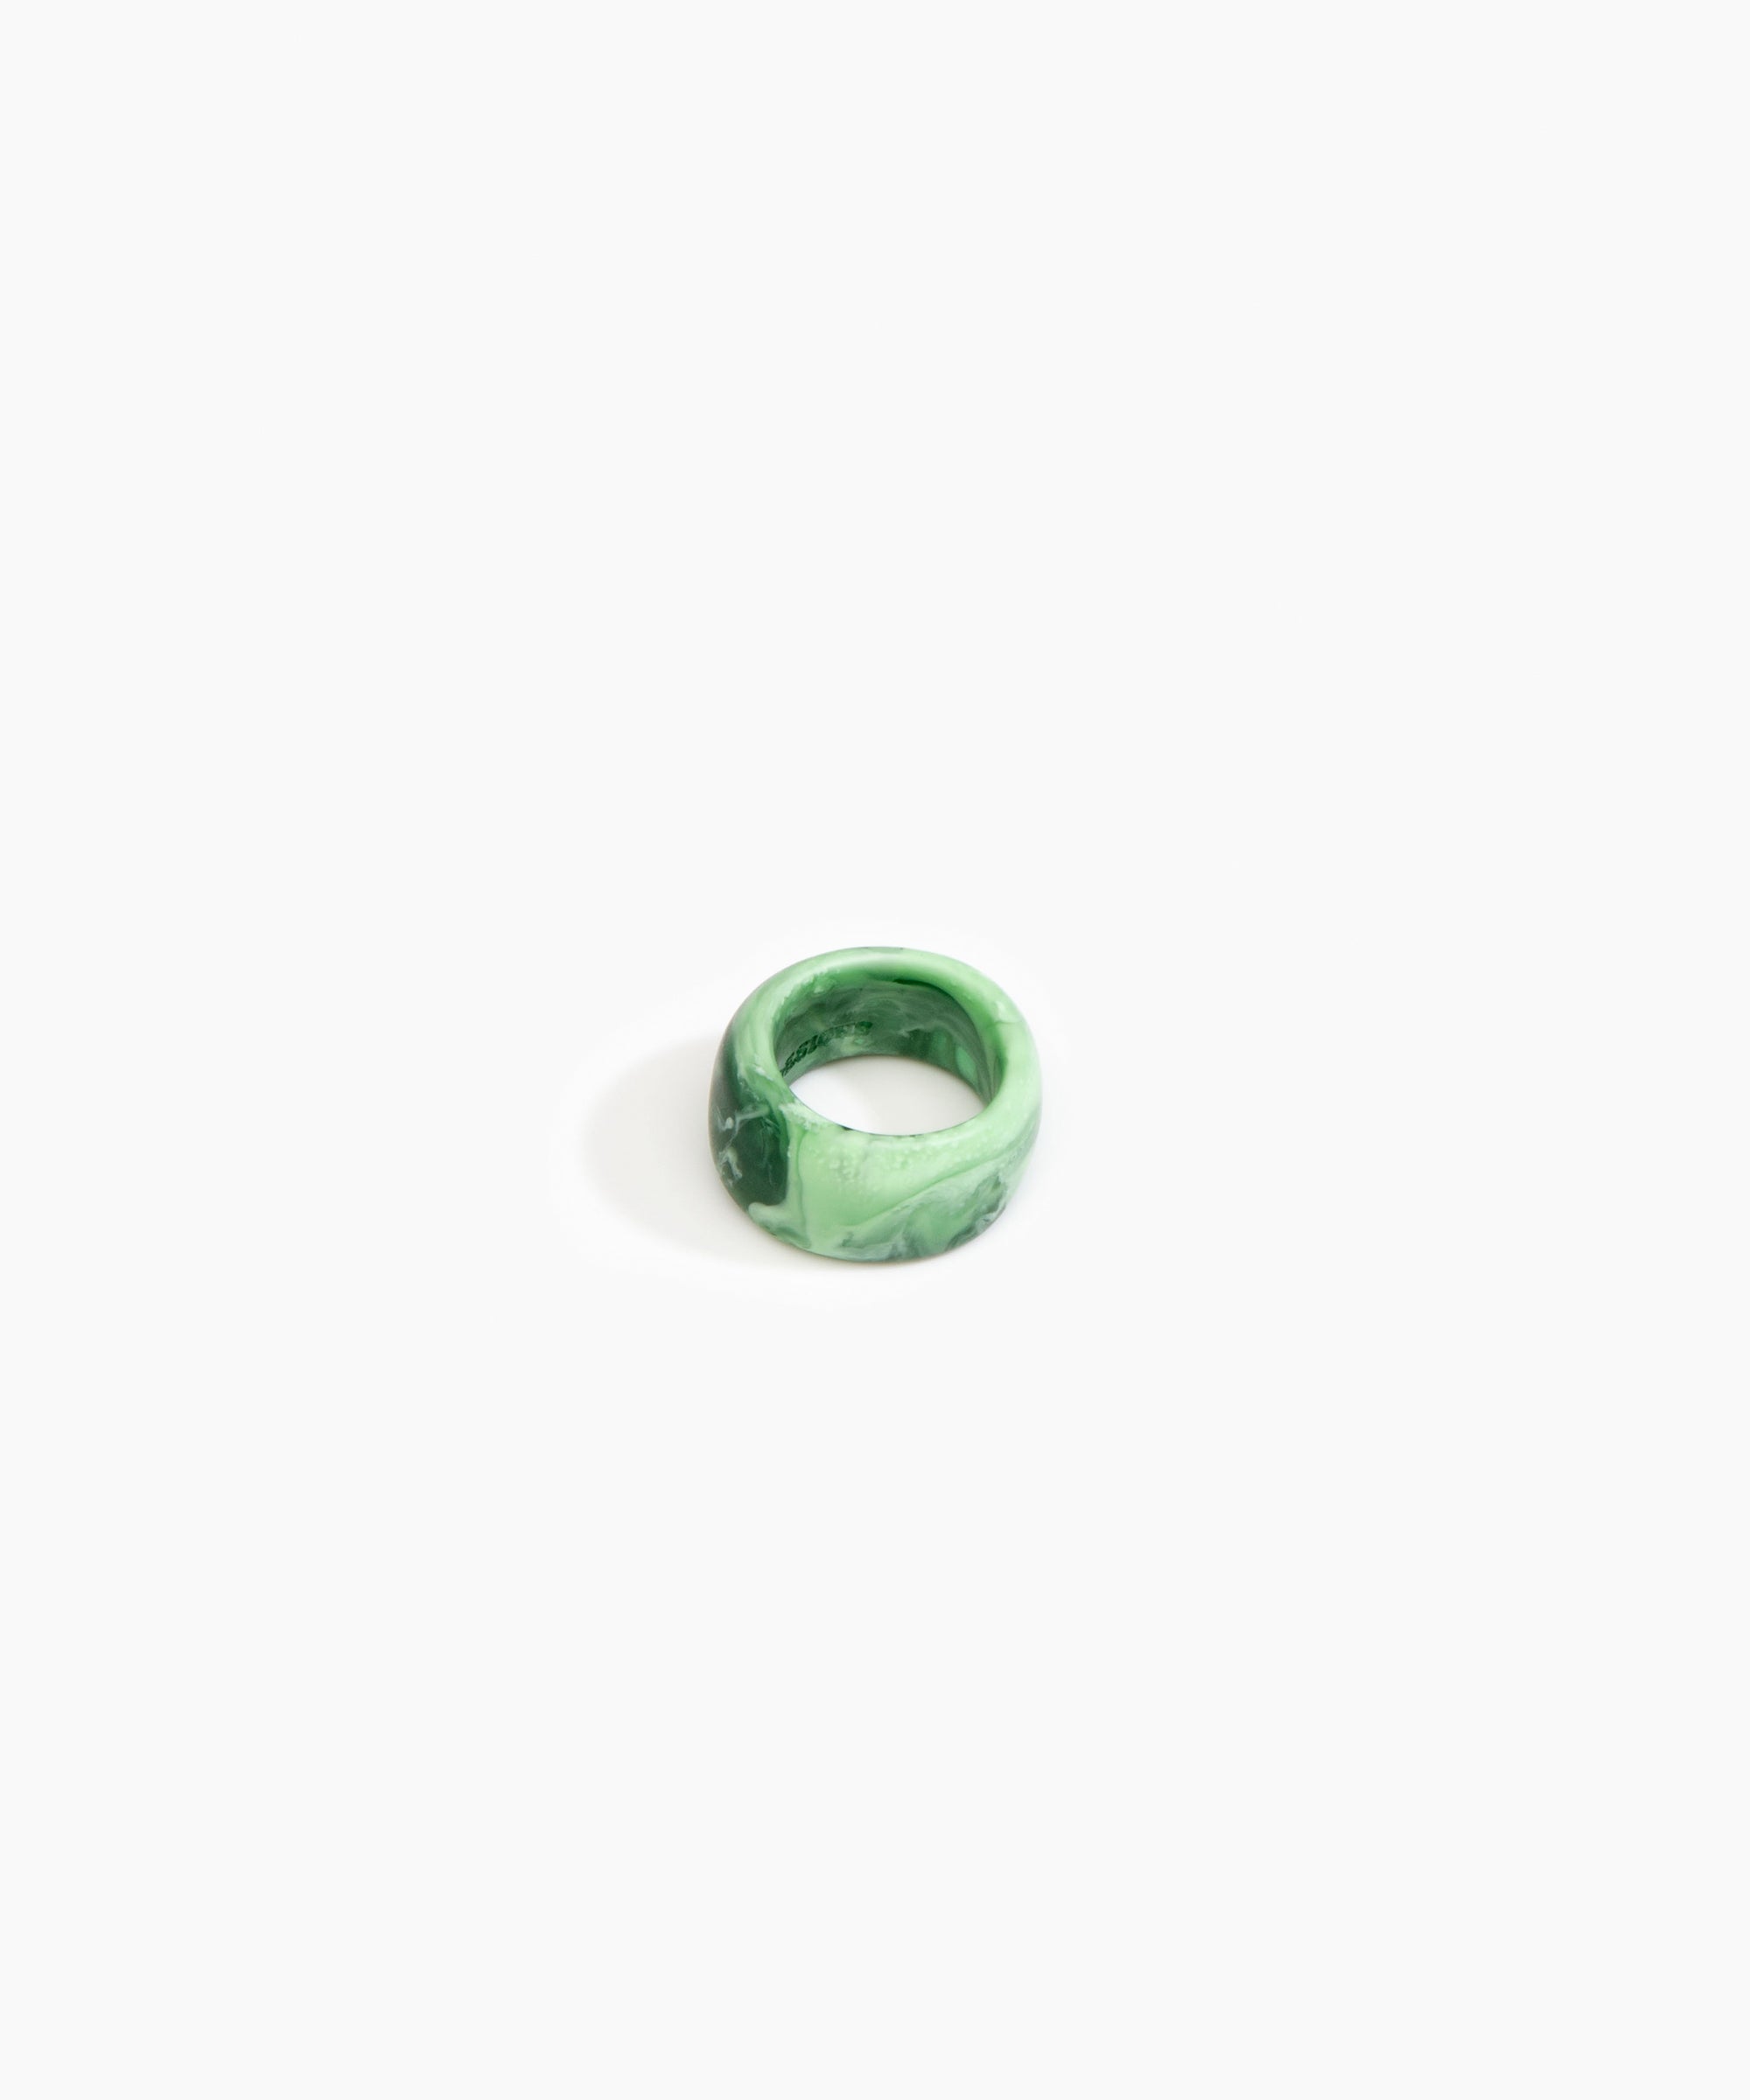 Dinosaur Designs Band Ring Rings in Moss color resin with Wide Fit